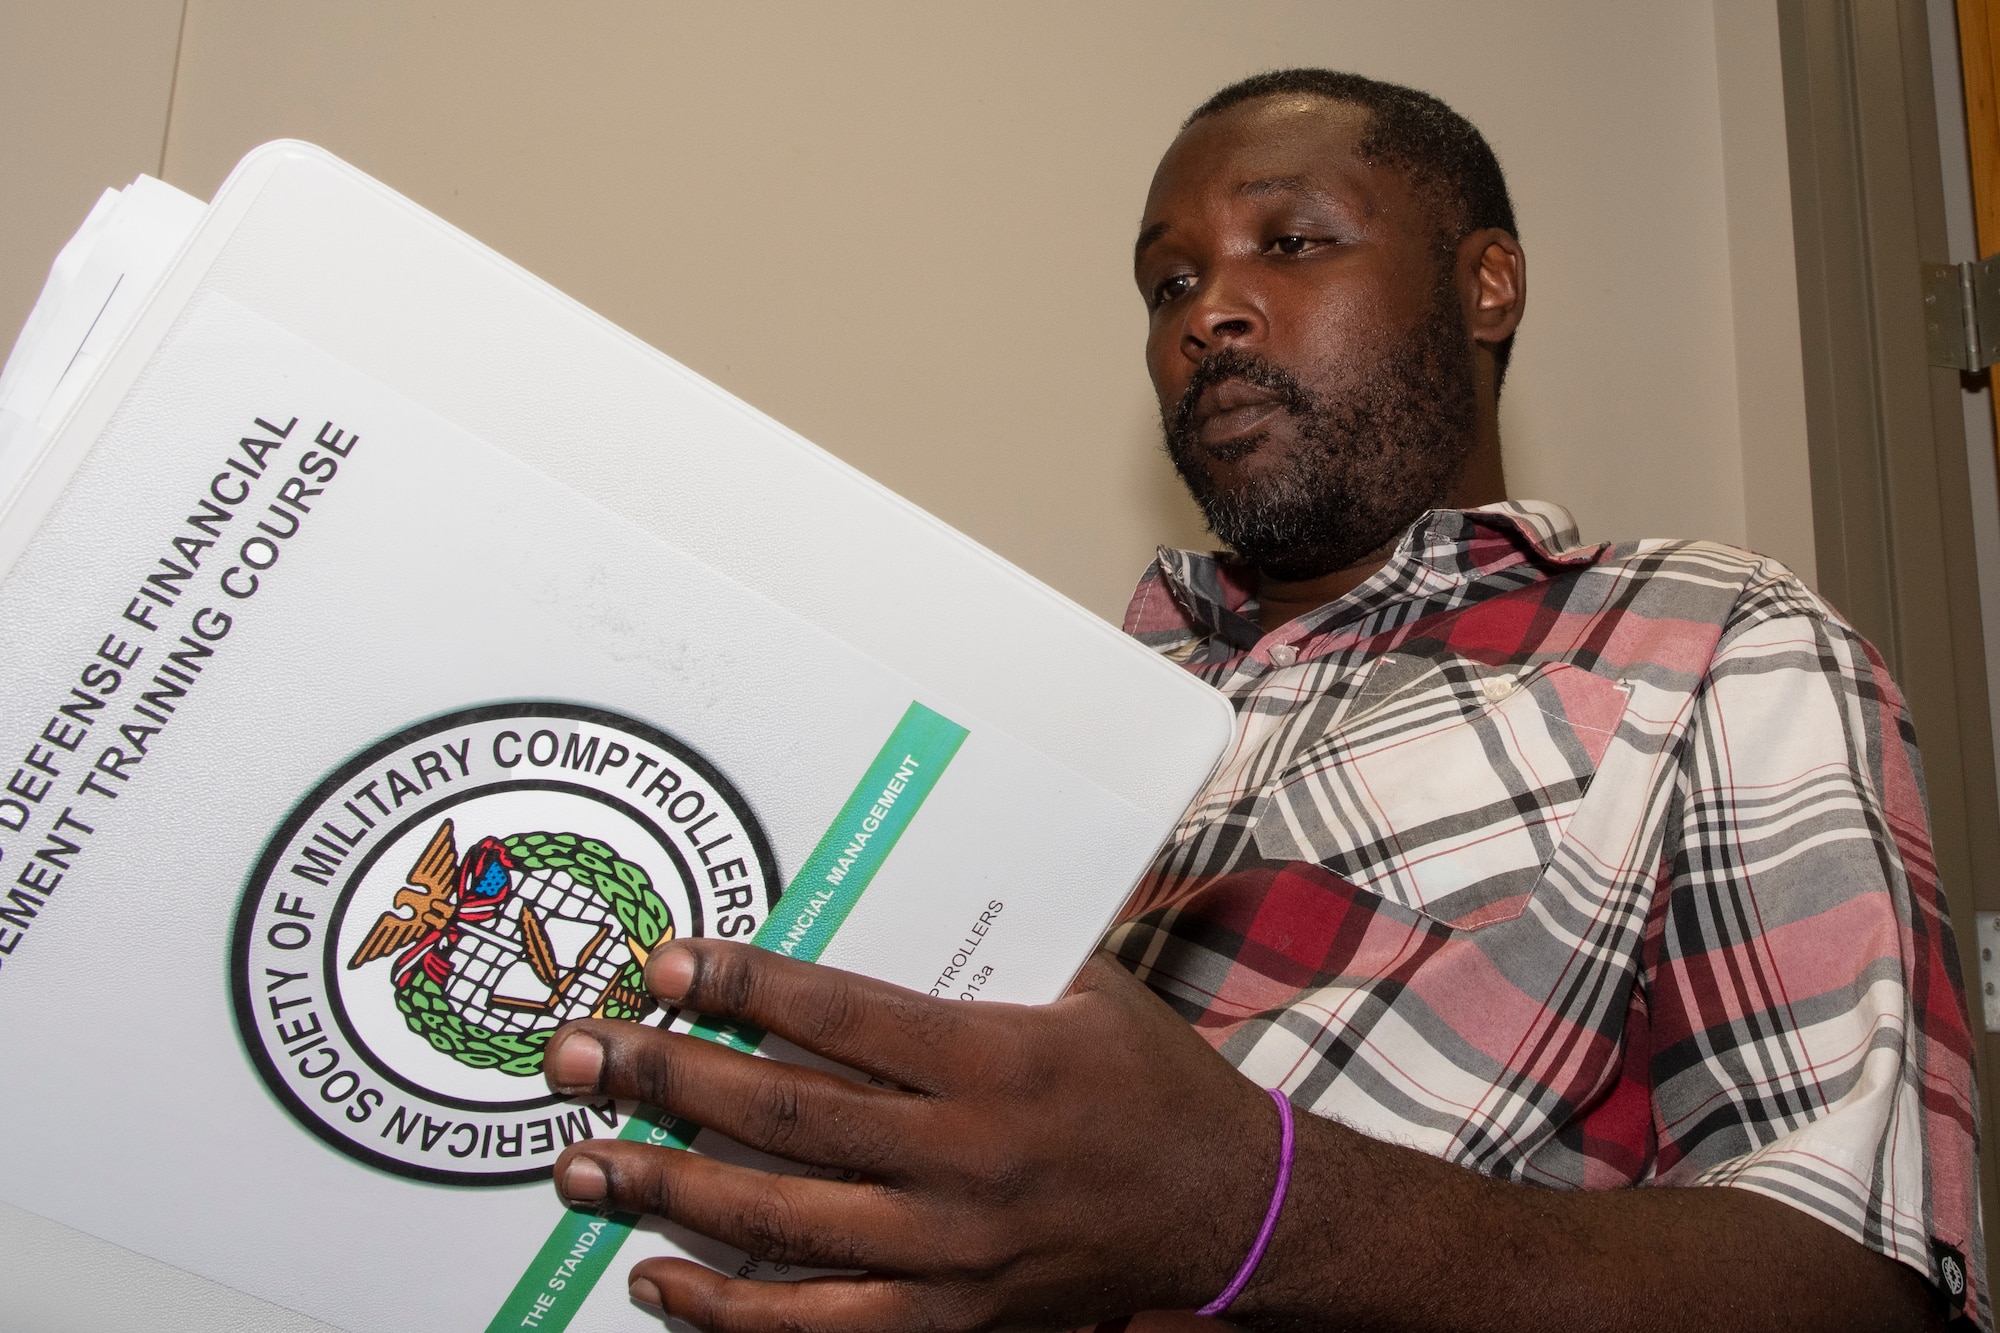 Phillip Floyd, 307th Bomb Wing budget technician, reviews study materials for the Department of Defense Financial Manager Certification course at Barksdale Air Force Base, Louisiana, May 19, 2019.  He recently became the first recipient of the Elsie Steffany Memorial Scholarship, an award that helps defray the costs associated with the course.  Certified Defense Financial Managers gain a deep insight and knowledge into DoD finances, adding value to their respective units. (U.S. Air Force photo by Master Sgt. Ted Daigle)